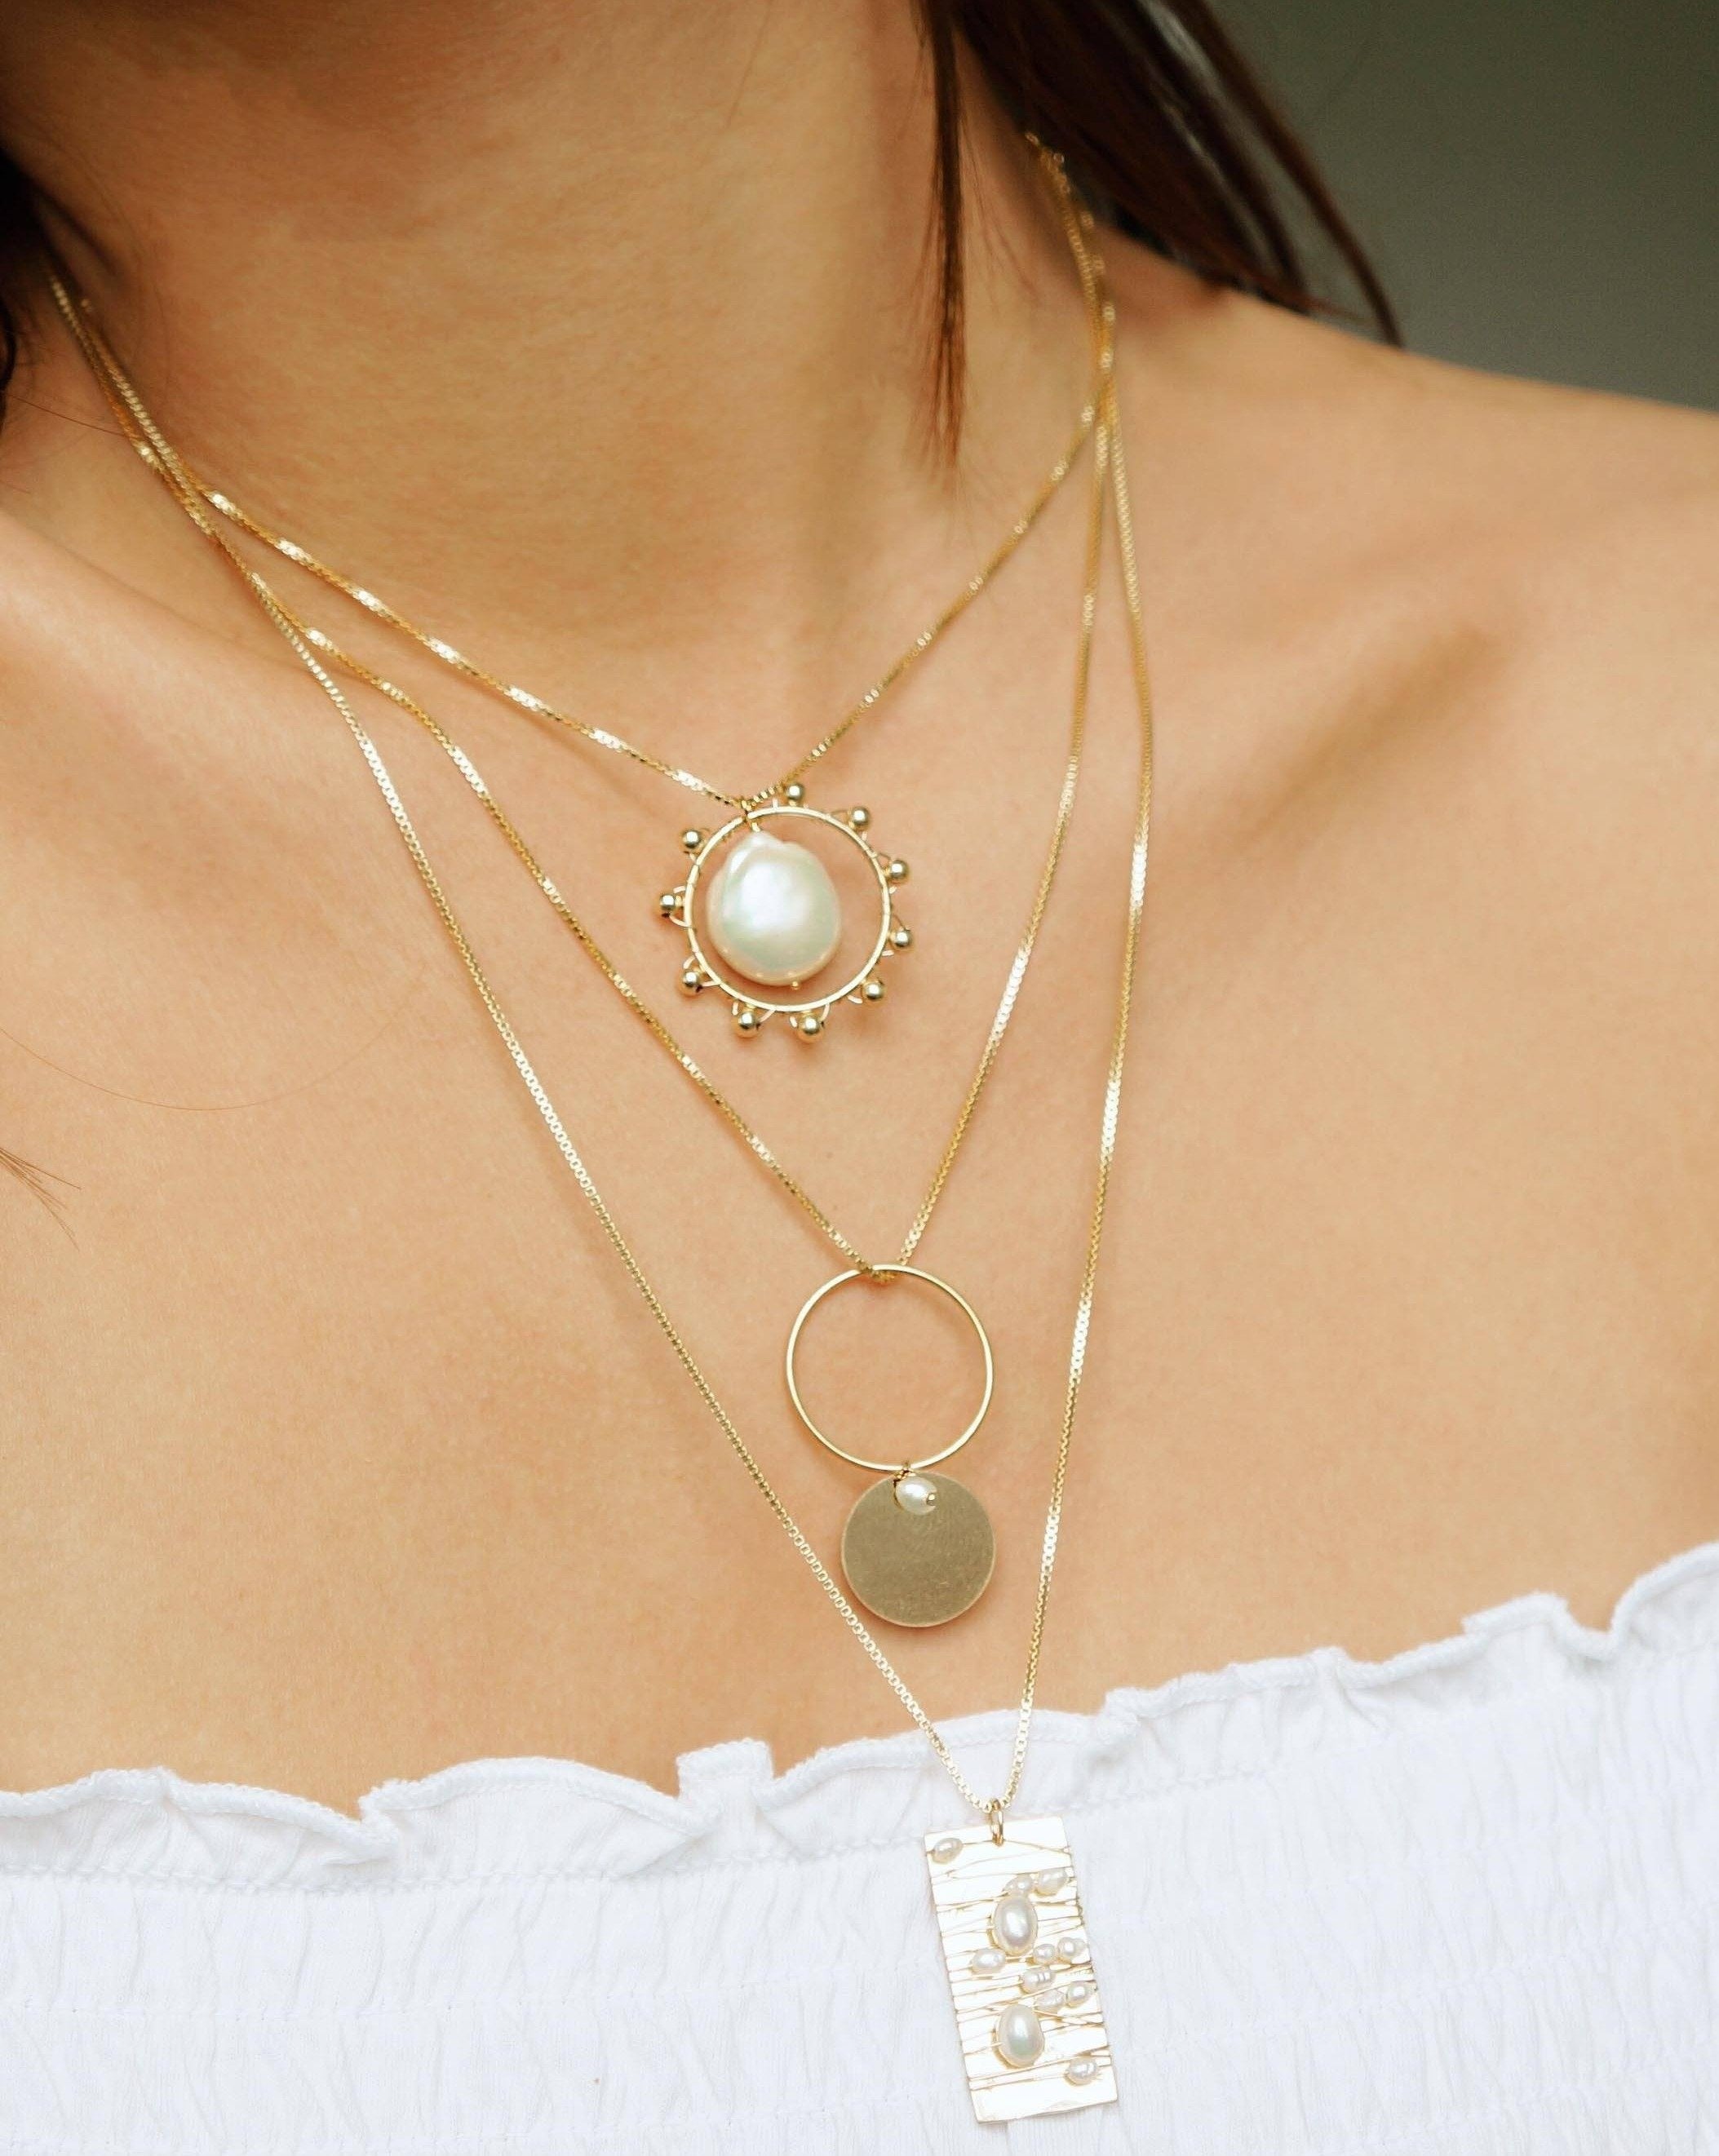 Tabla Necklace by KOZAKH. A 20 inches long necklace, crafted in 14K Gold Filled, featuring a 14x28mm flat rectangle medallion wrapped with white rice pearls and irregular white Pearls.